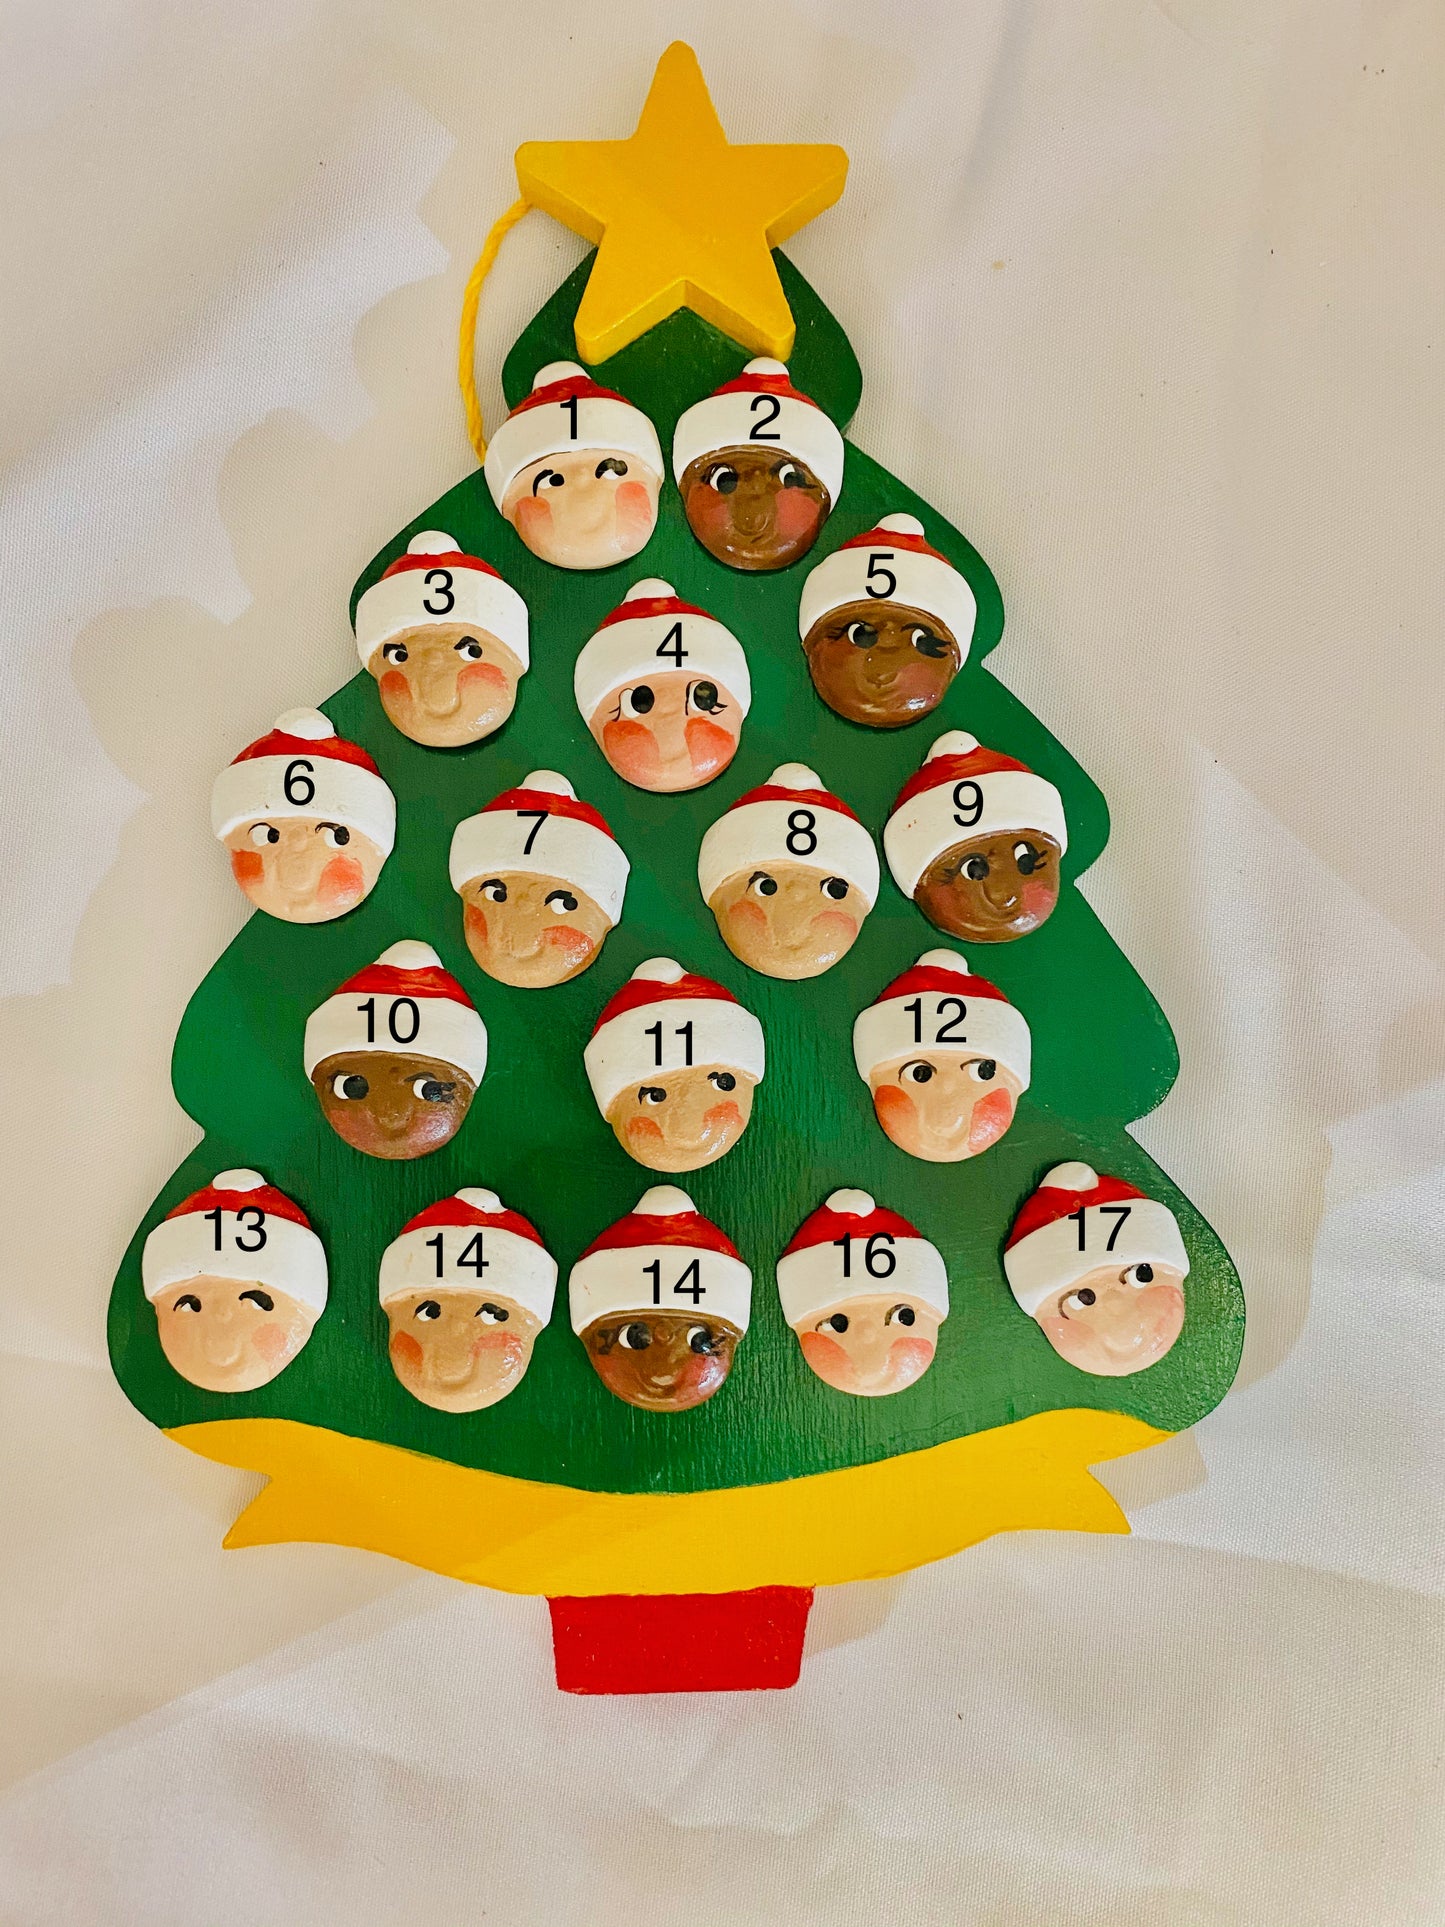 Personalized Ornament  17 Santa Faces on a Christmas Tree  7.5" x 6"